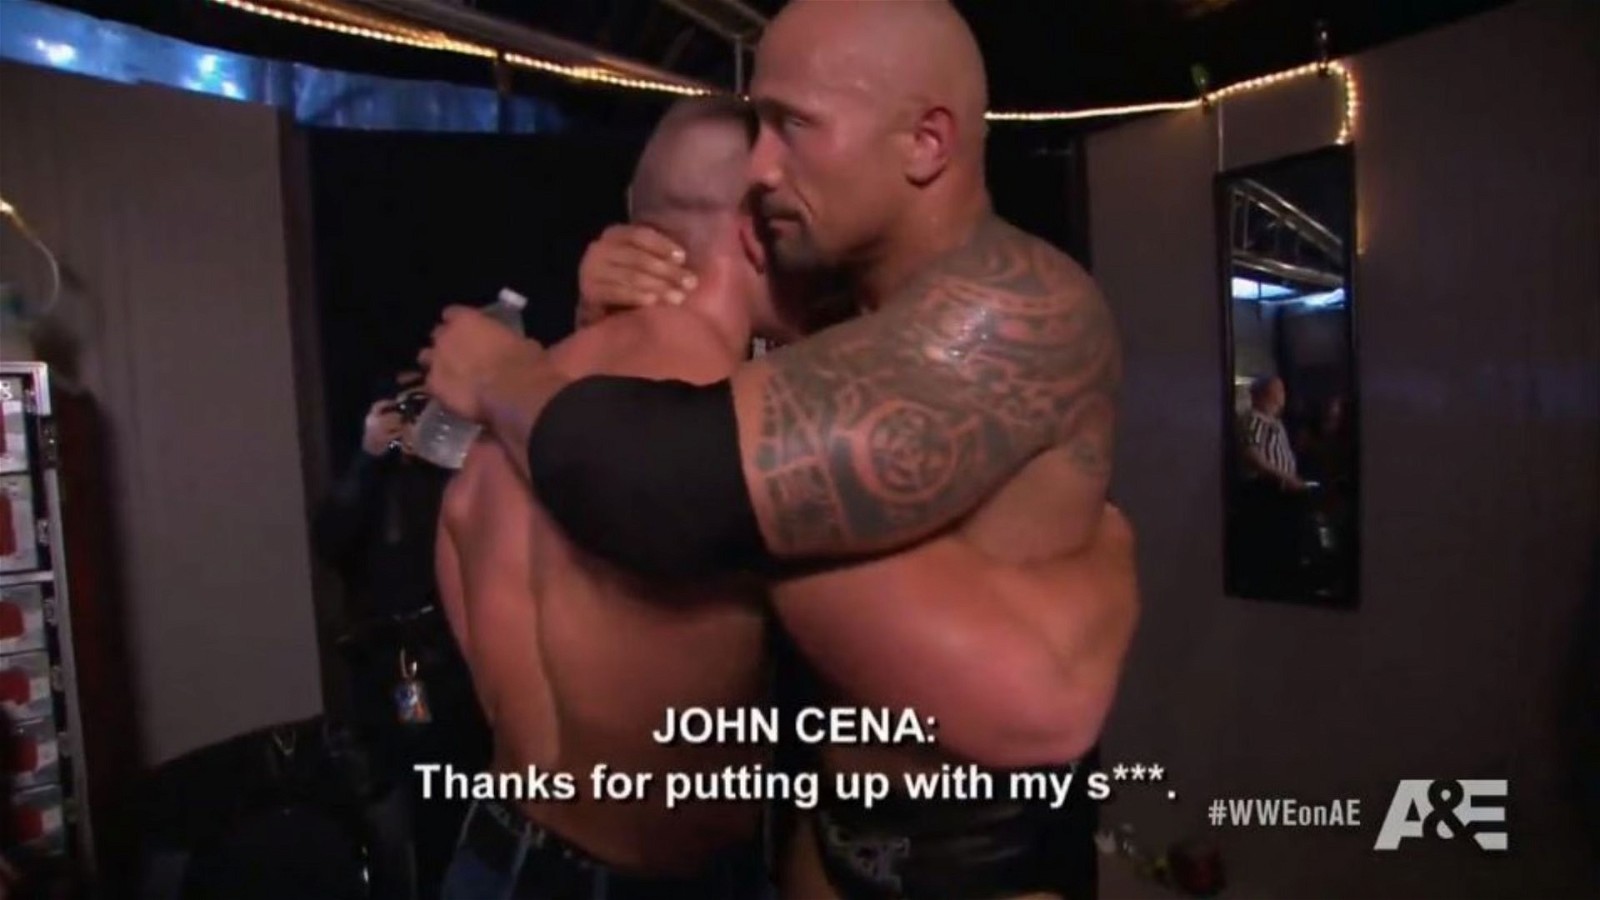 Dwayne Johnson and John Cena hash out their rivalry backstage